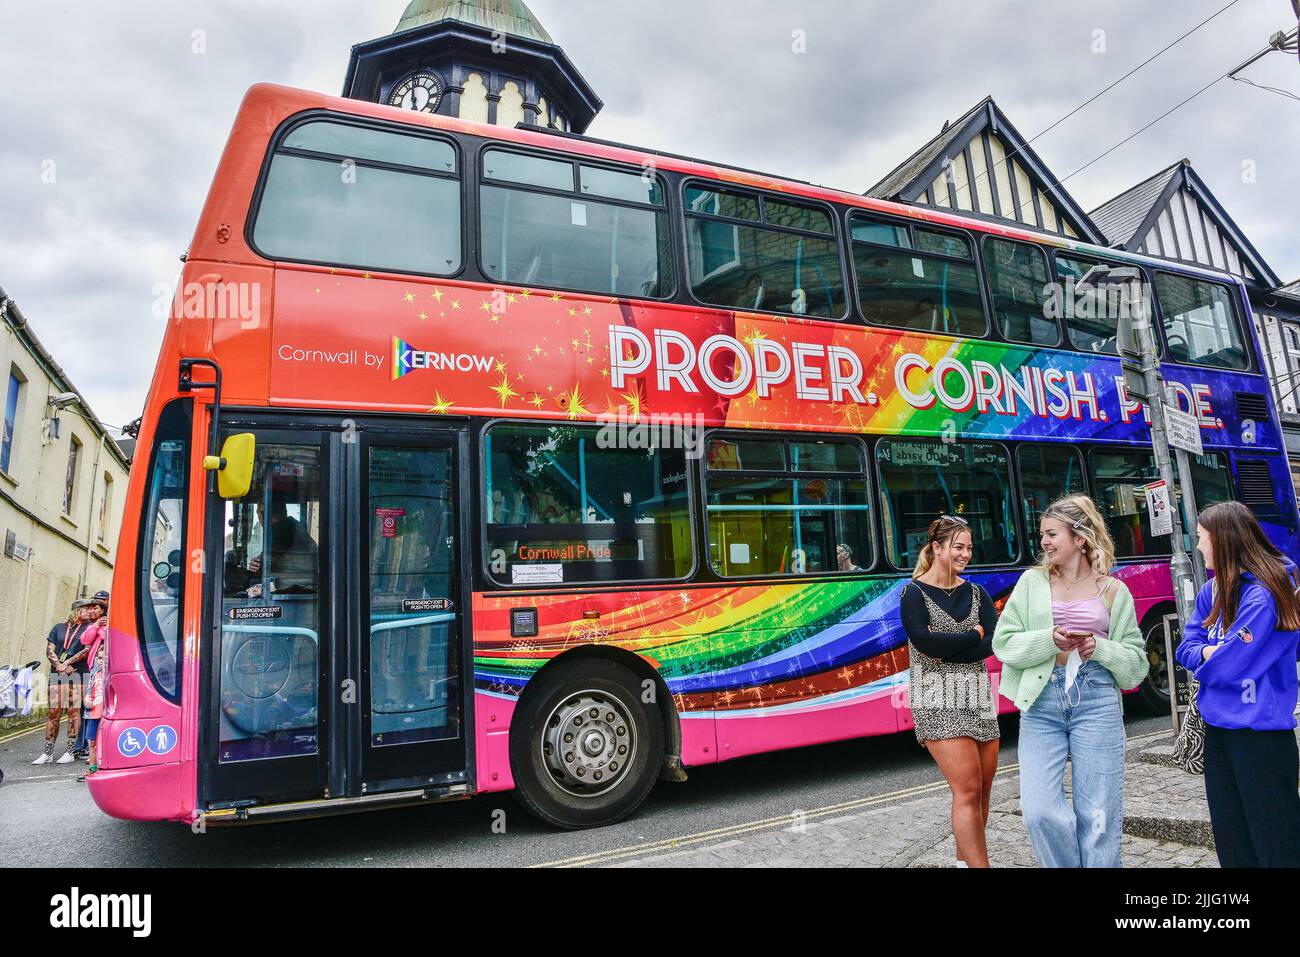 A double decker bus decorated and participating in the vibrant colourful Cornwall Prides Pride parade in Newquay Town centre in the UK. Stock Photo